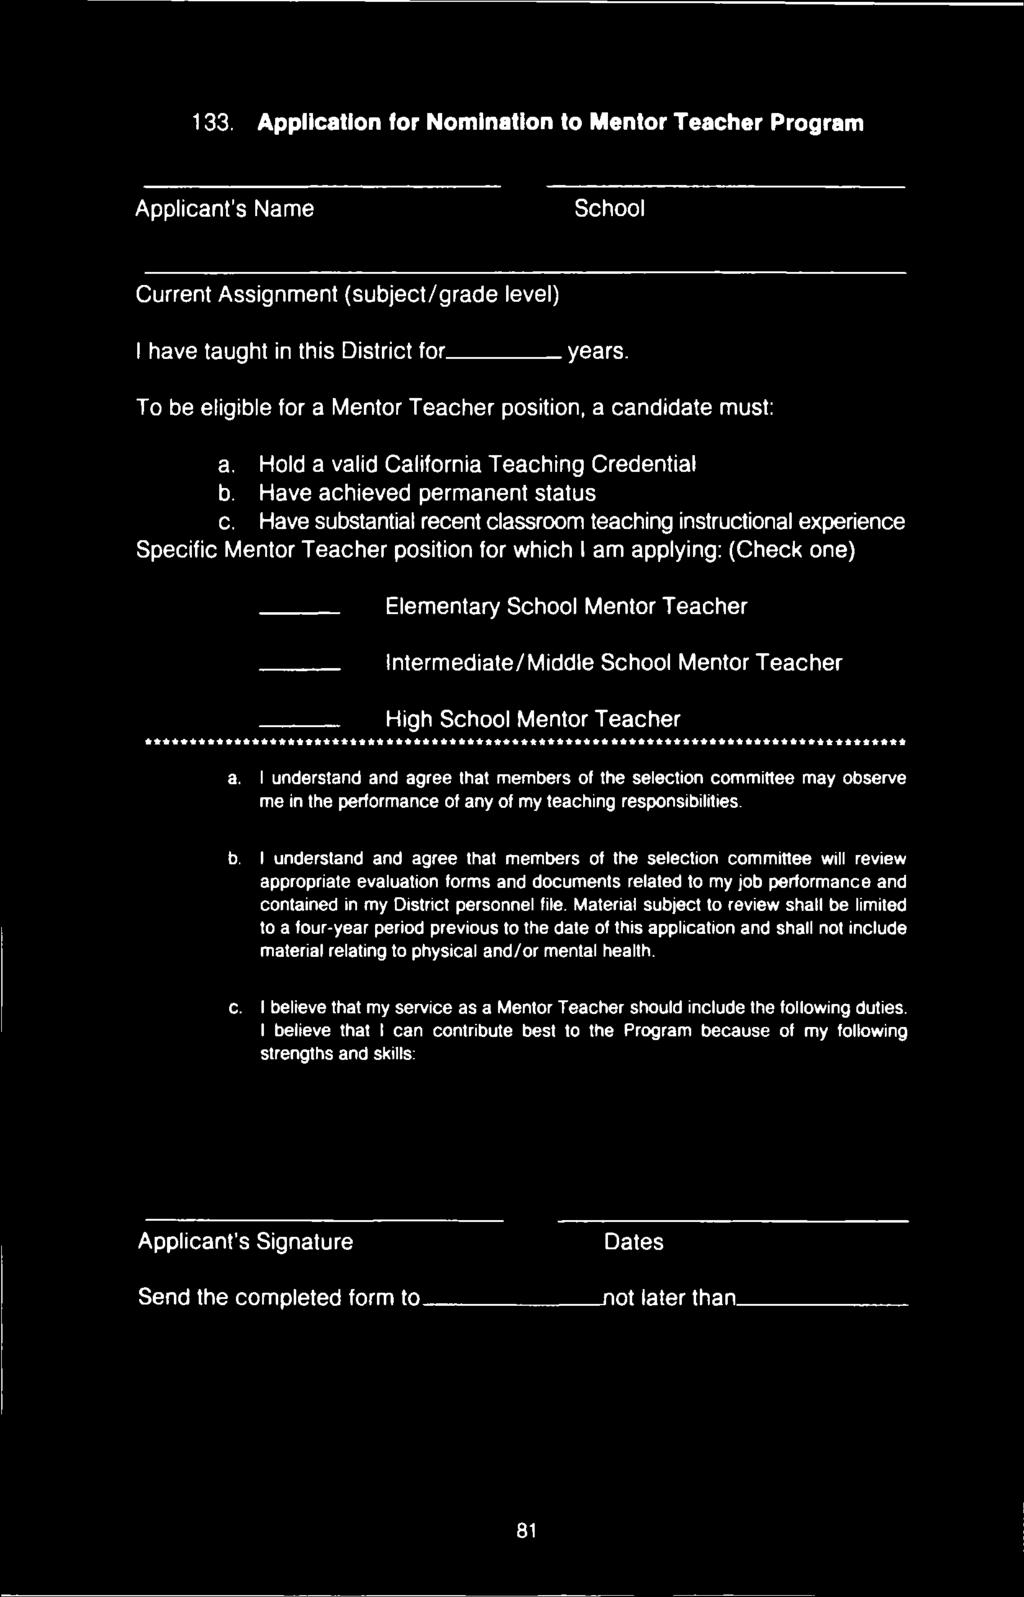 Have substantial recent classroom teaching instructional experience Specific Mentor Teacher position for which I am applying: (Check one) Elementary School Mentor Teacher Intermediate/Middle School